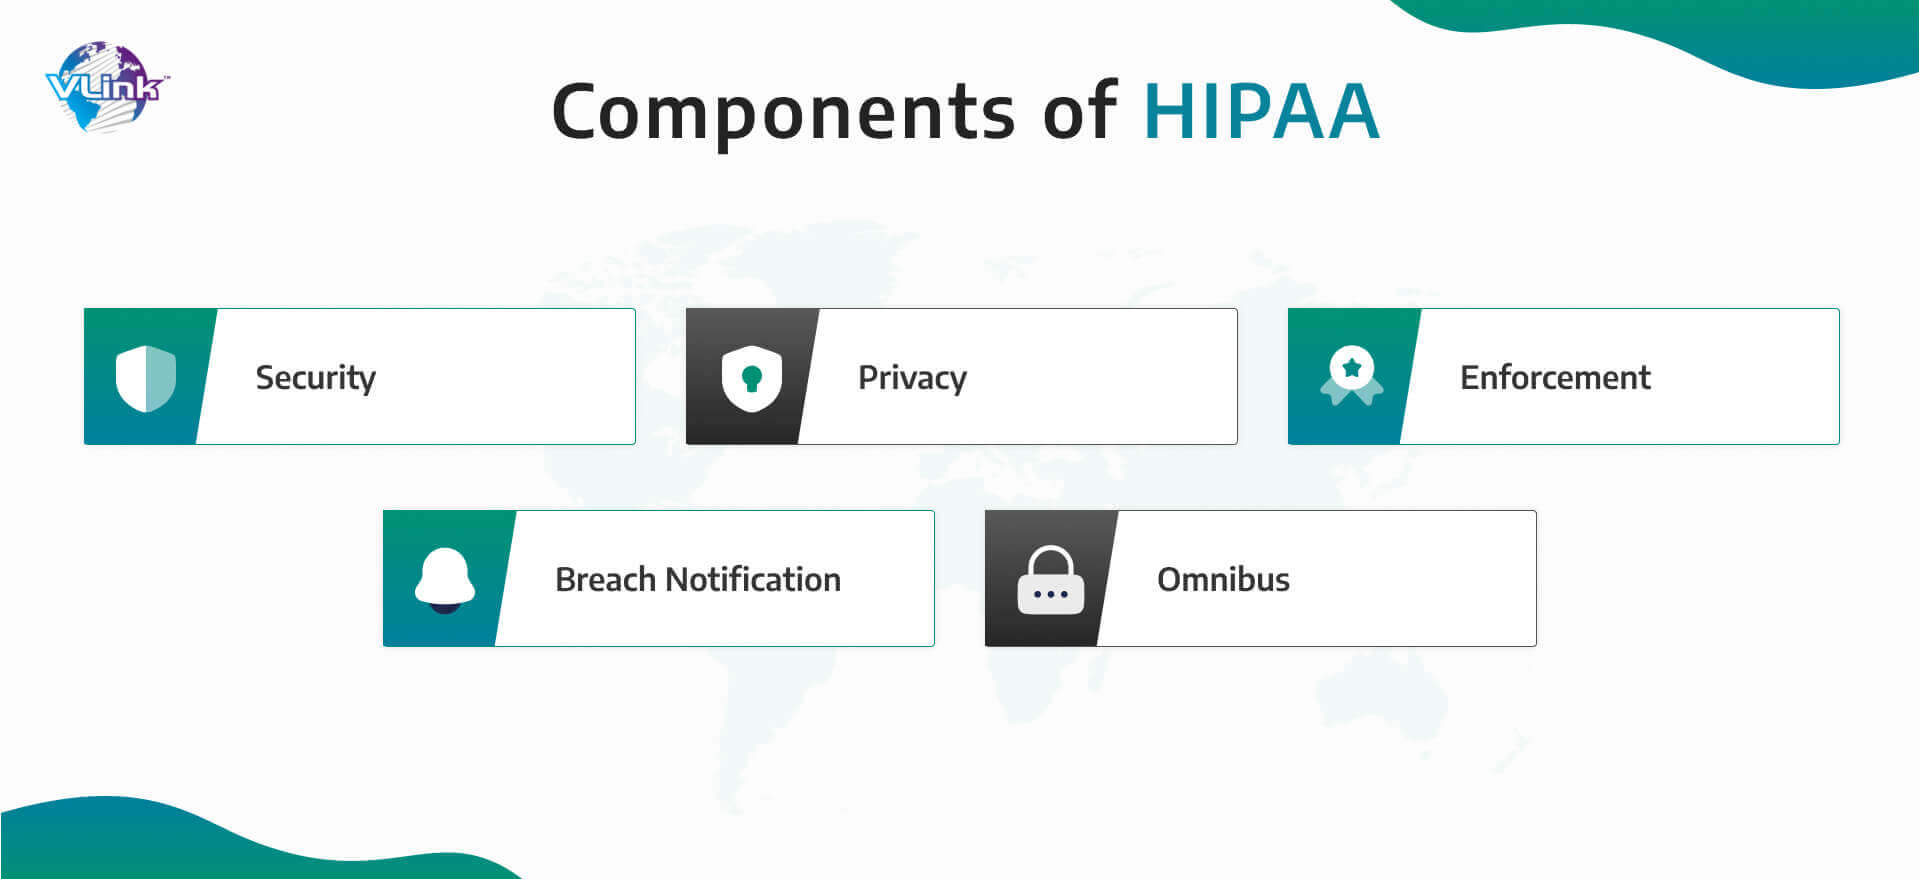 Components of HIPAA